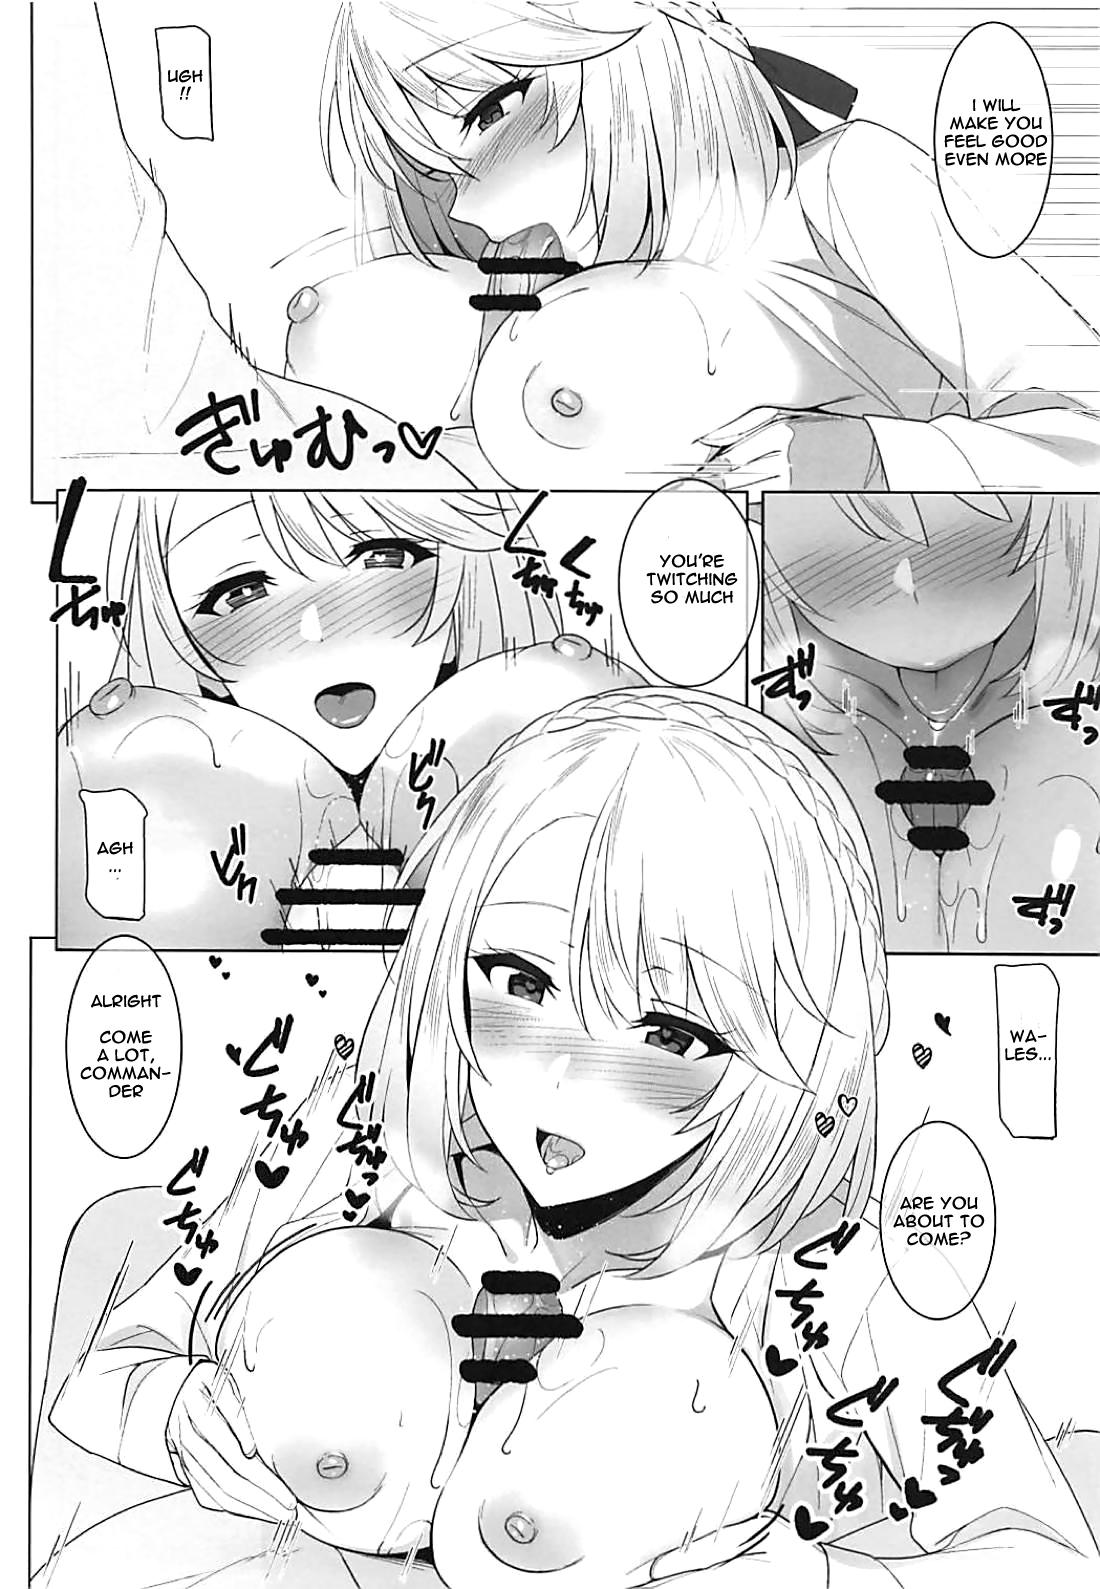 Travesti Wales to! | With Wales! - Azur lane Culo Grande - Page 10